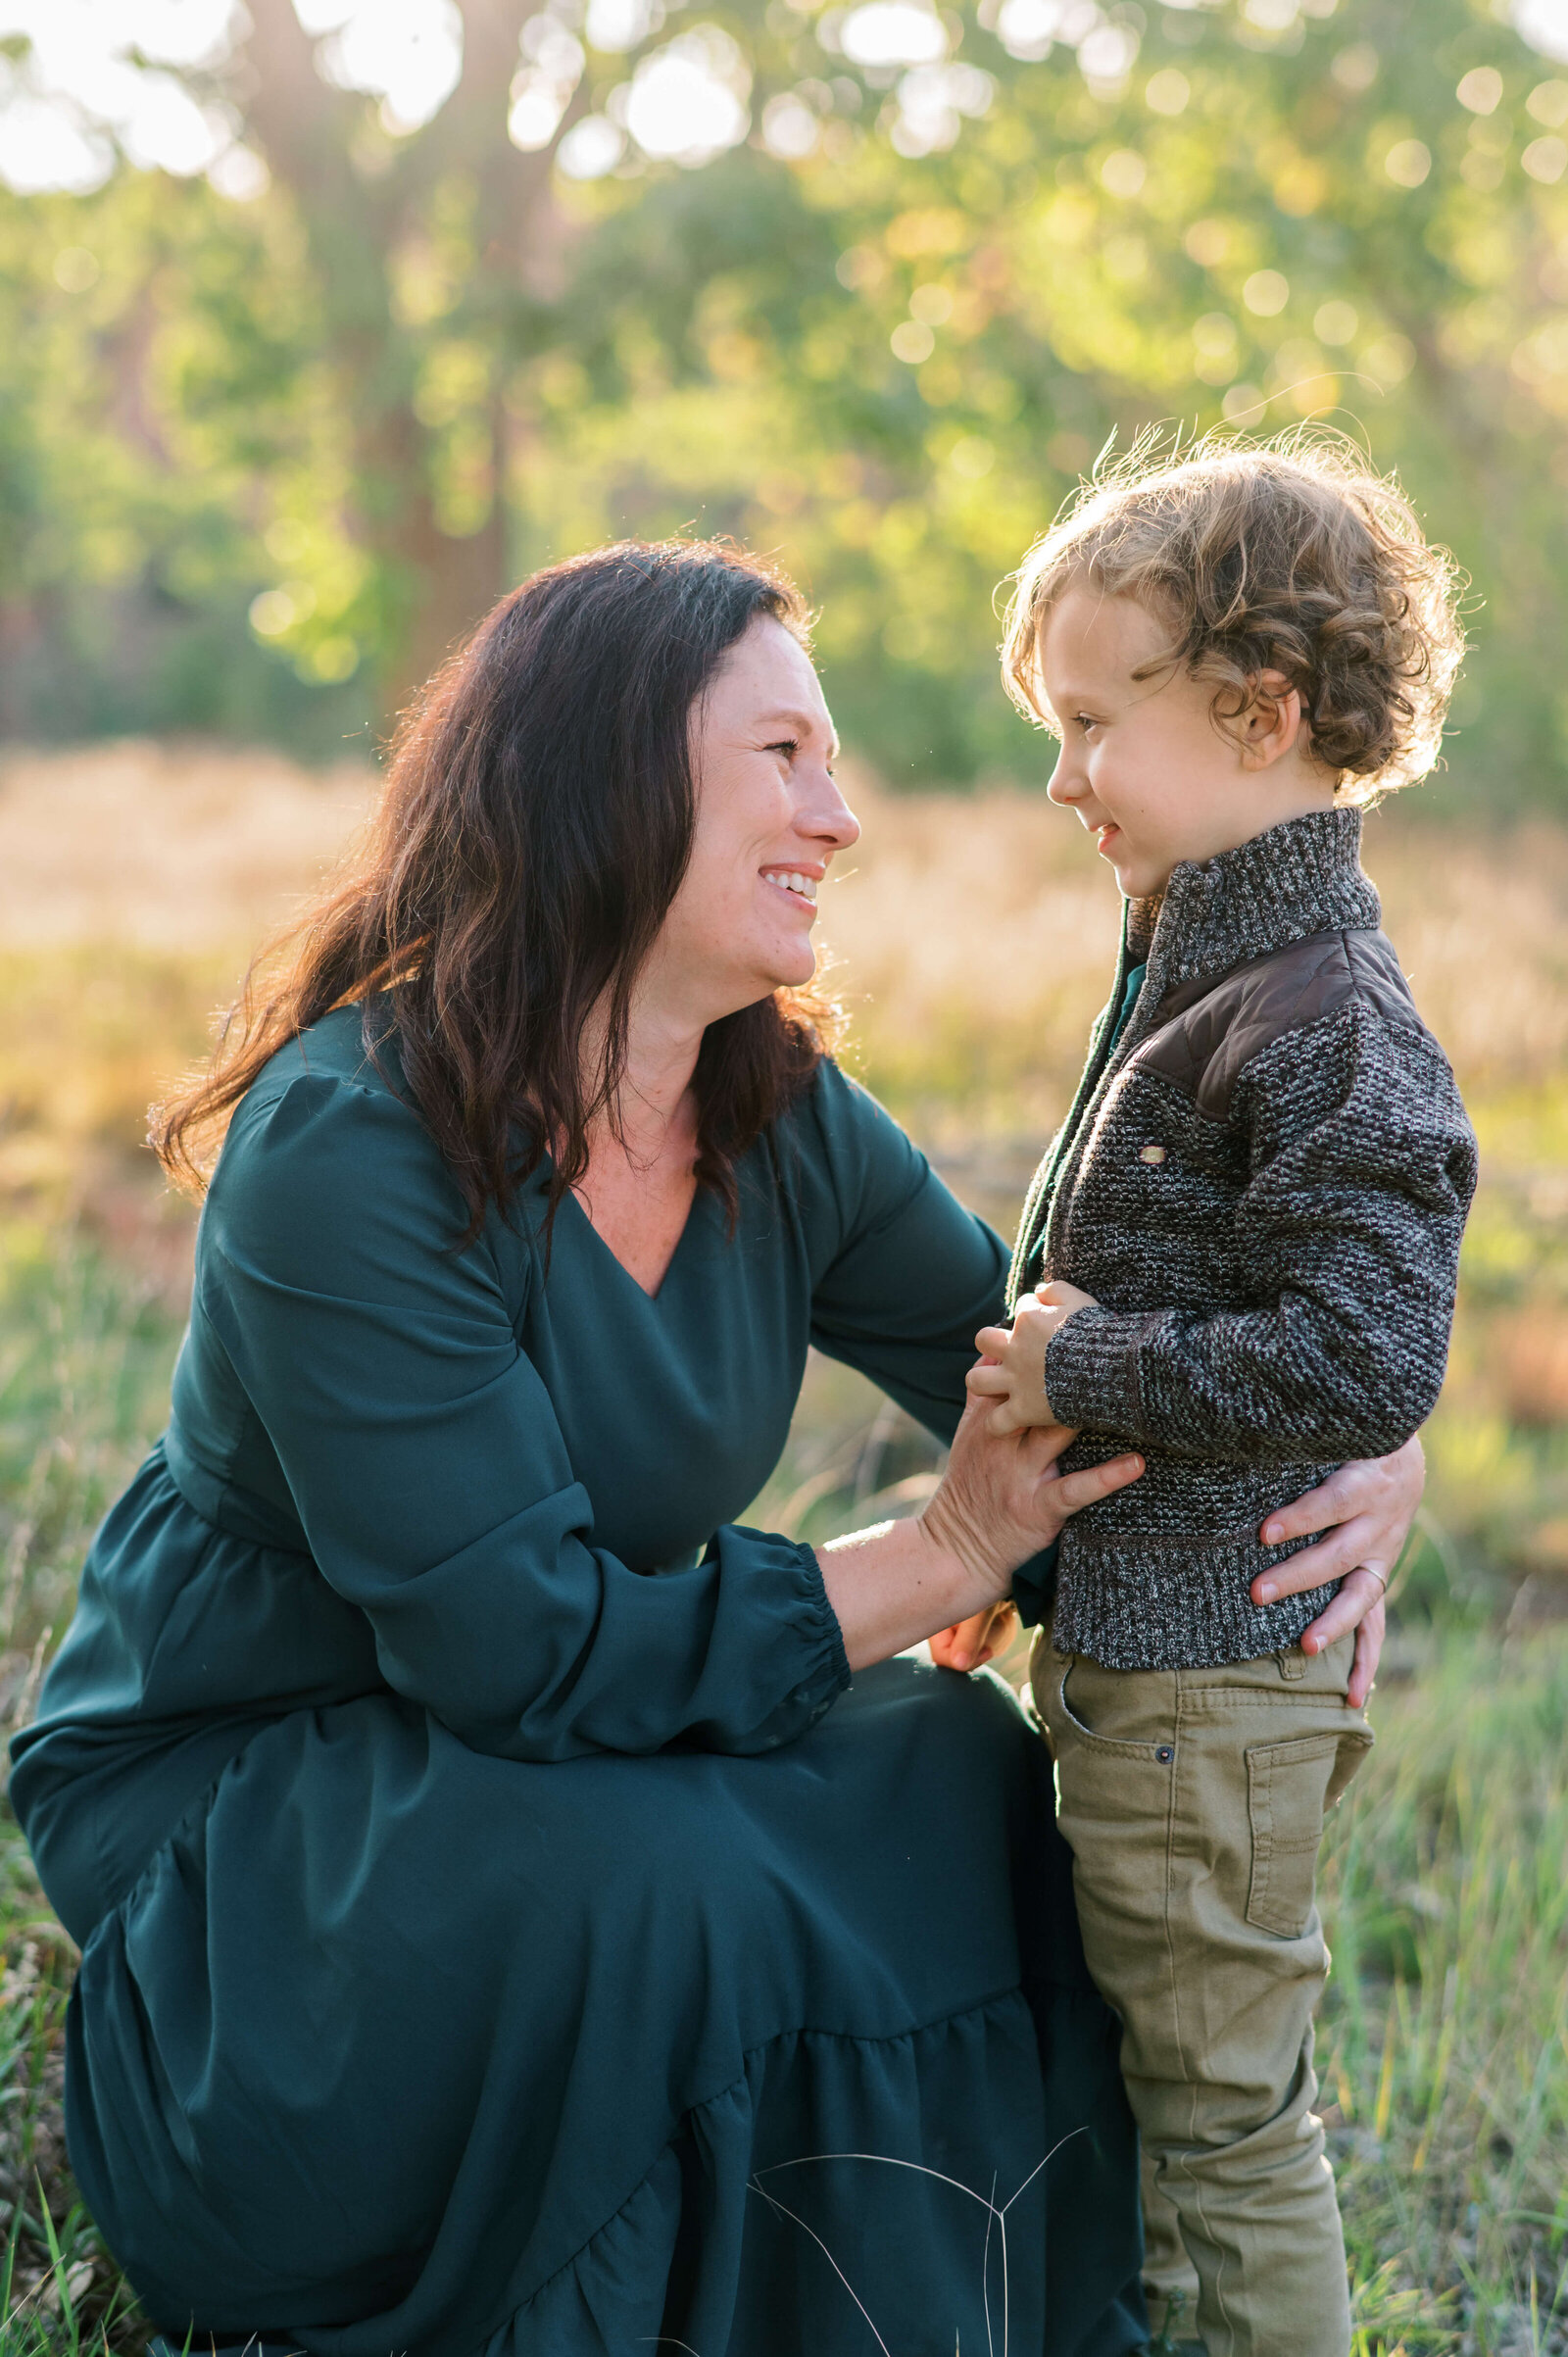 A brunette mother in a long green dress smiles at her young son who wears a tweed jacket and tan pants